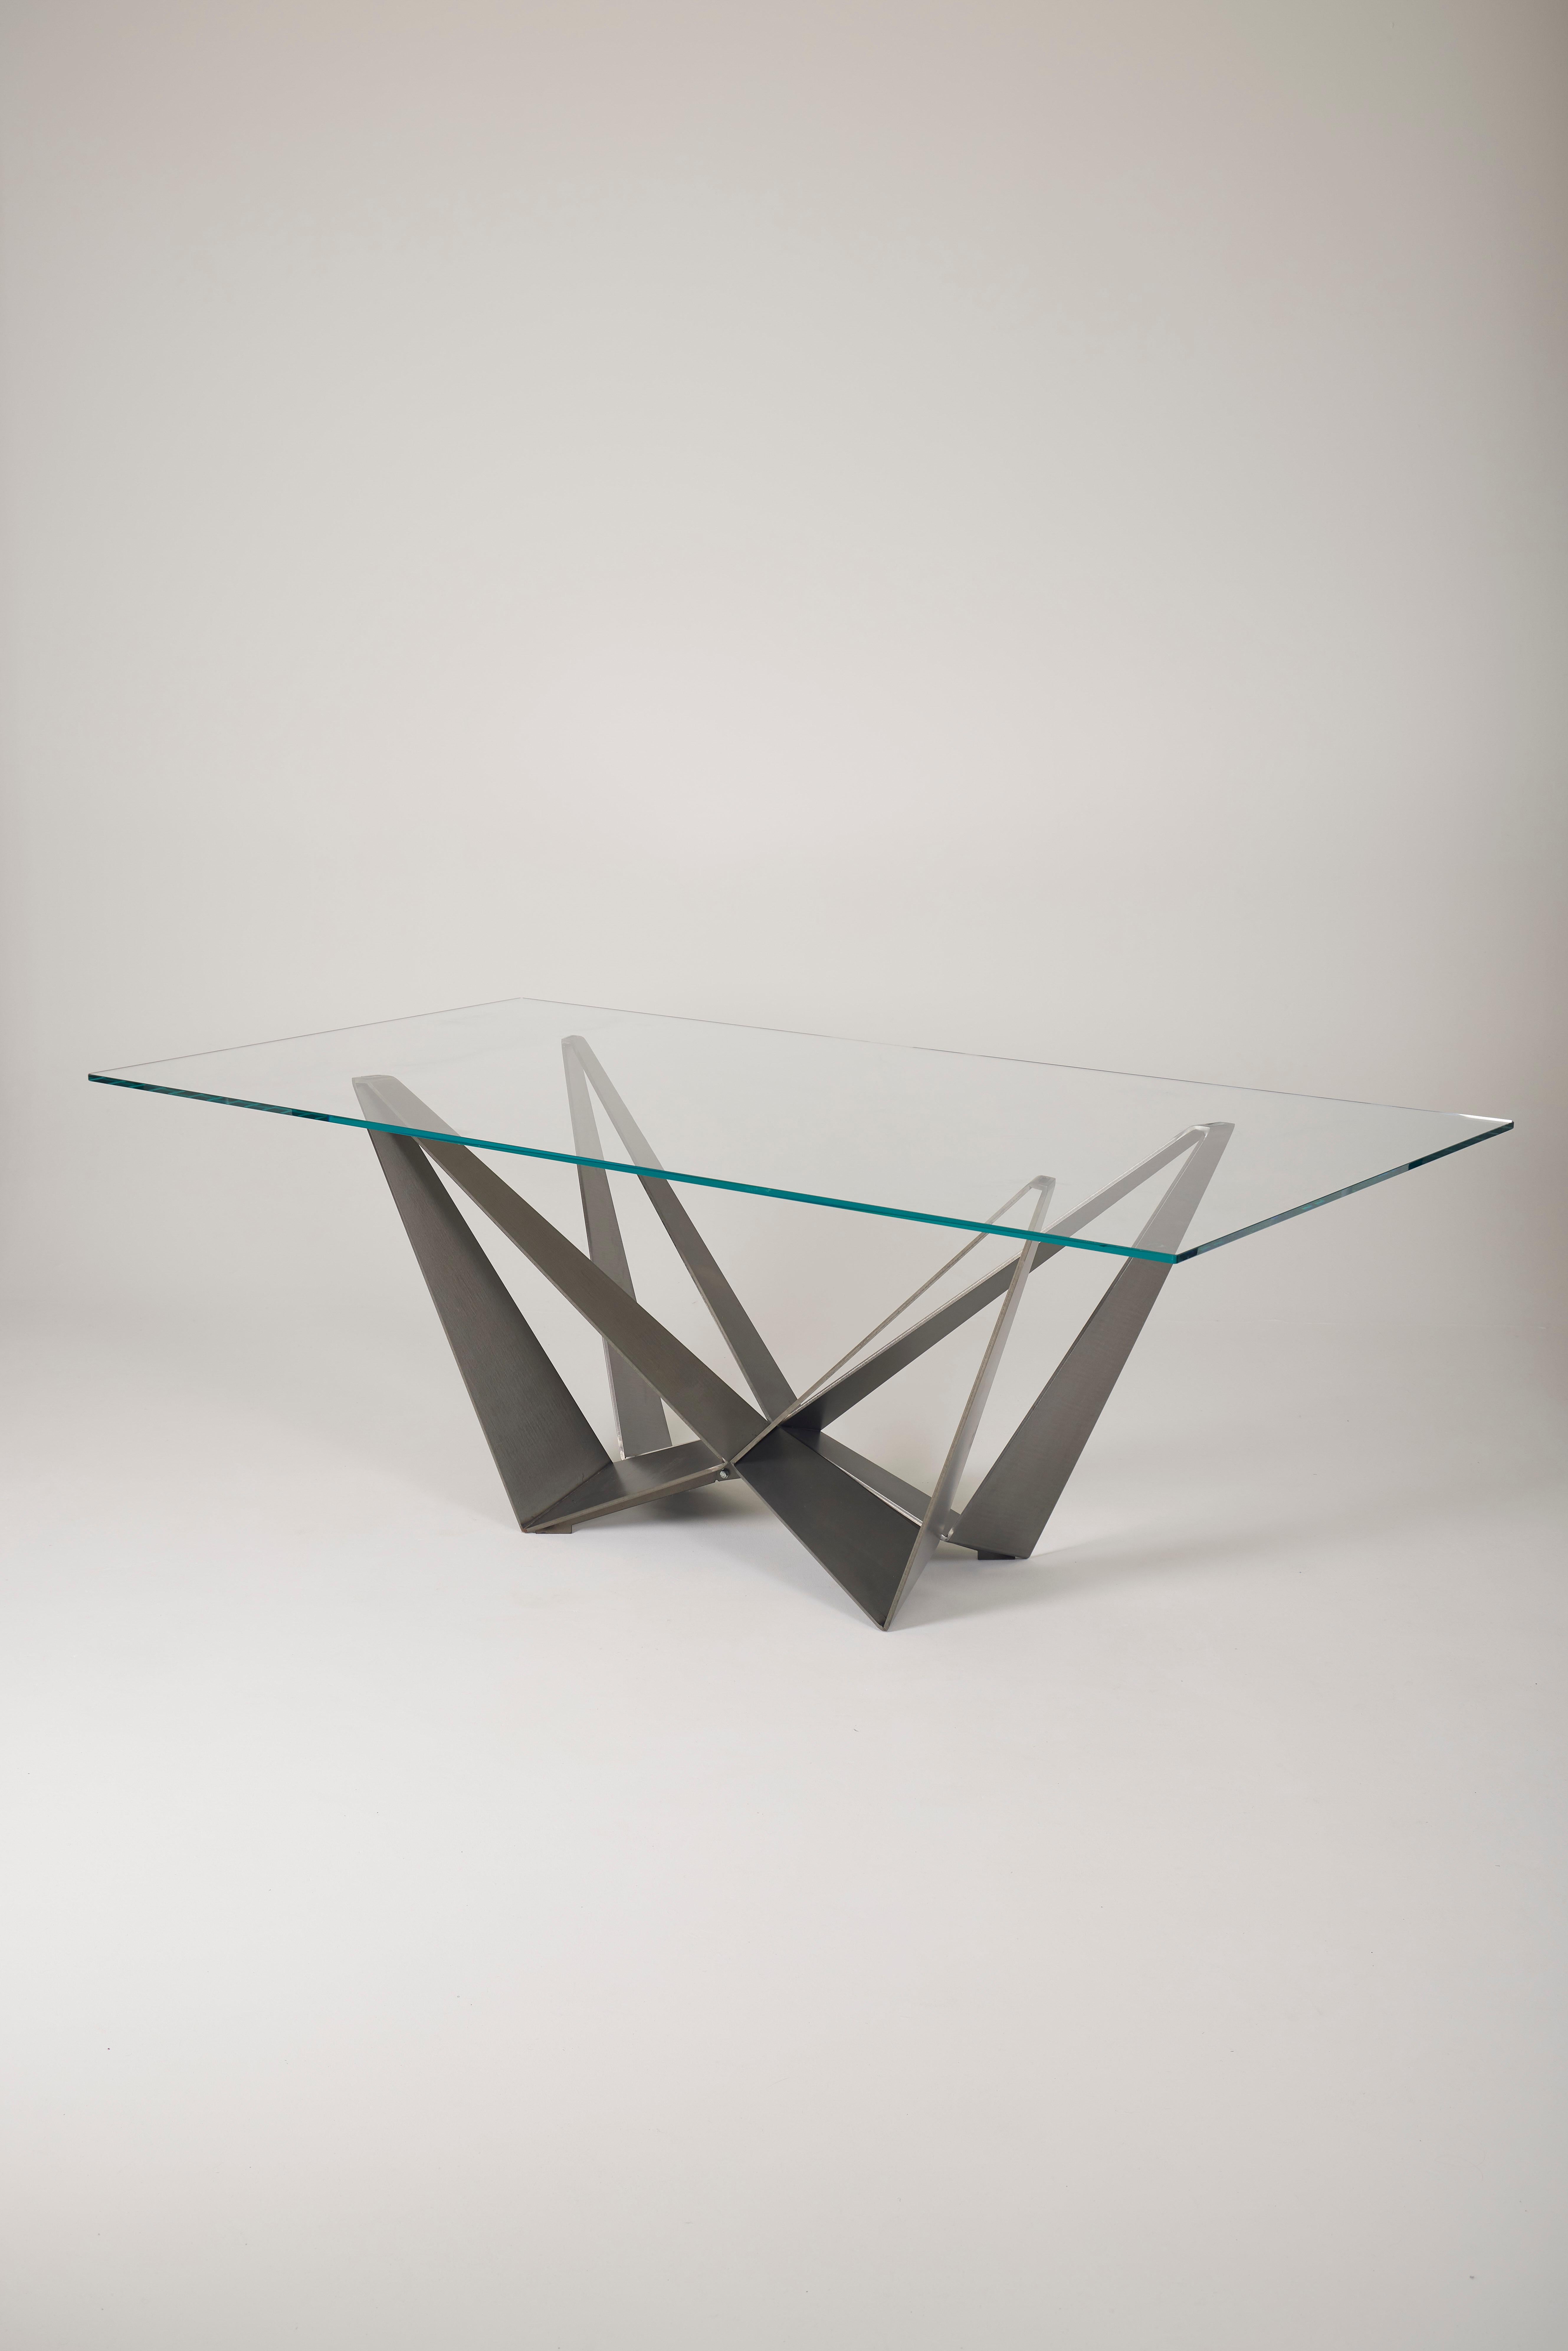 Dining table Skorpio by Italian designer Andrea Lucatello. The geometric base is made of metal, and the tabletop is glass. In very good condition.
LP1919